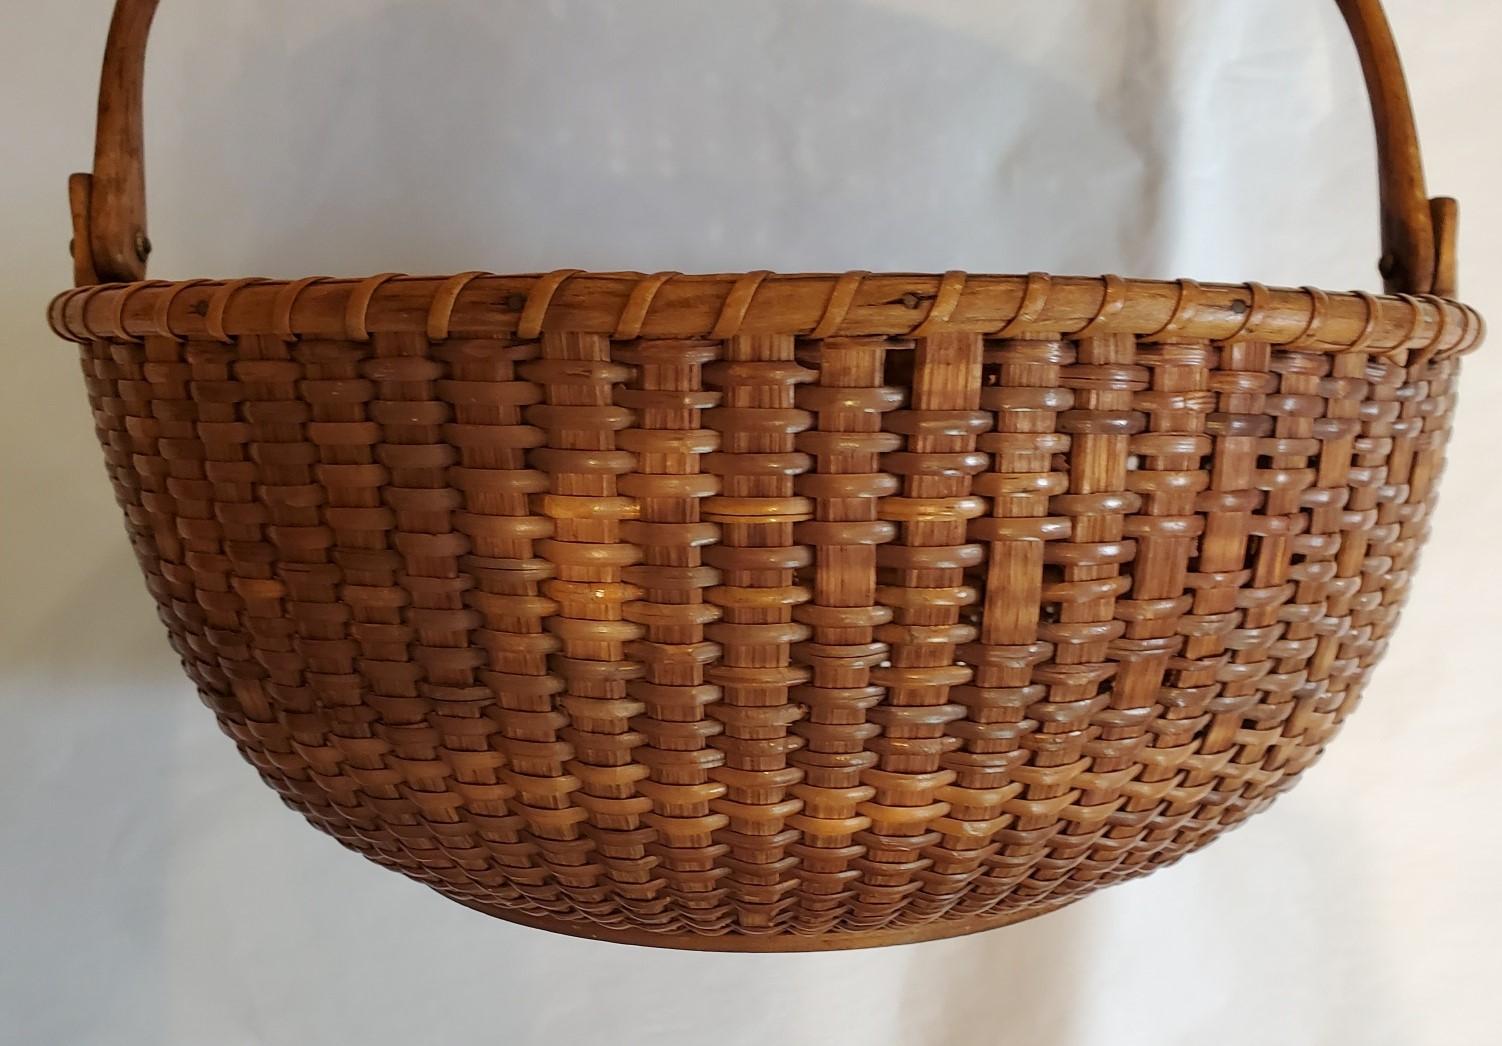 Antique Nantucket Lightship Basket from the South Shoals Lightship, attributed to Captain Thomas James (Nantucket: 1811 - 1885), circa 1870s, an early round, open Nantucket basket with wooden splint staves, cane weave, carved swing handle attached